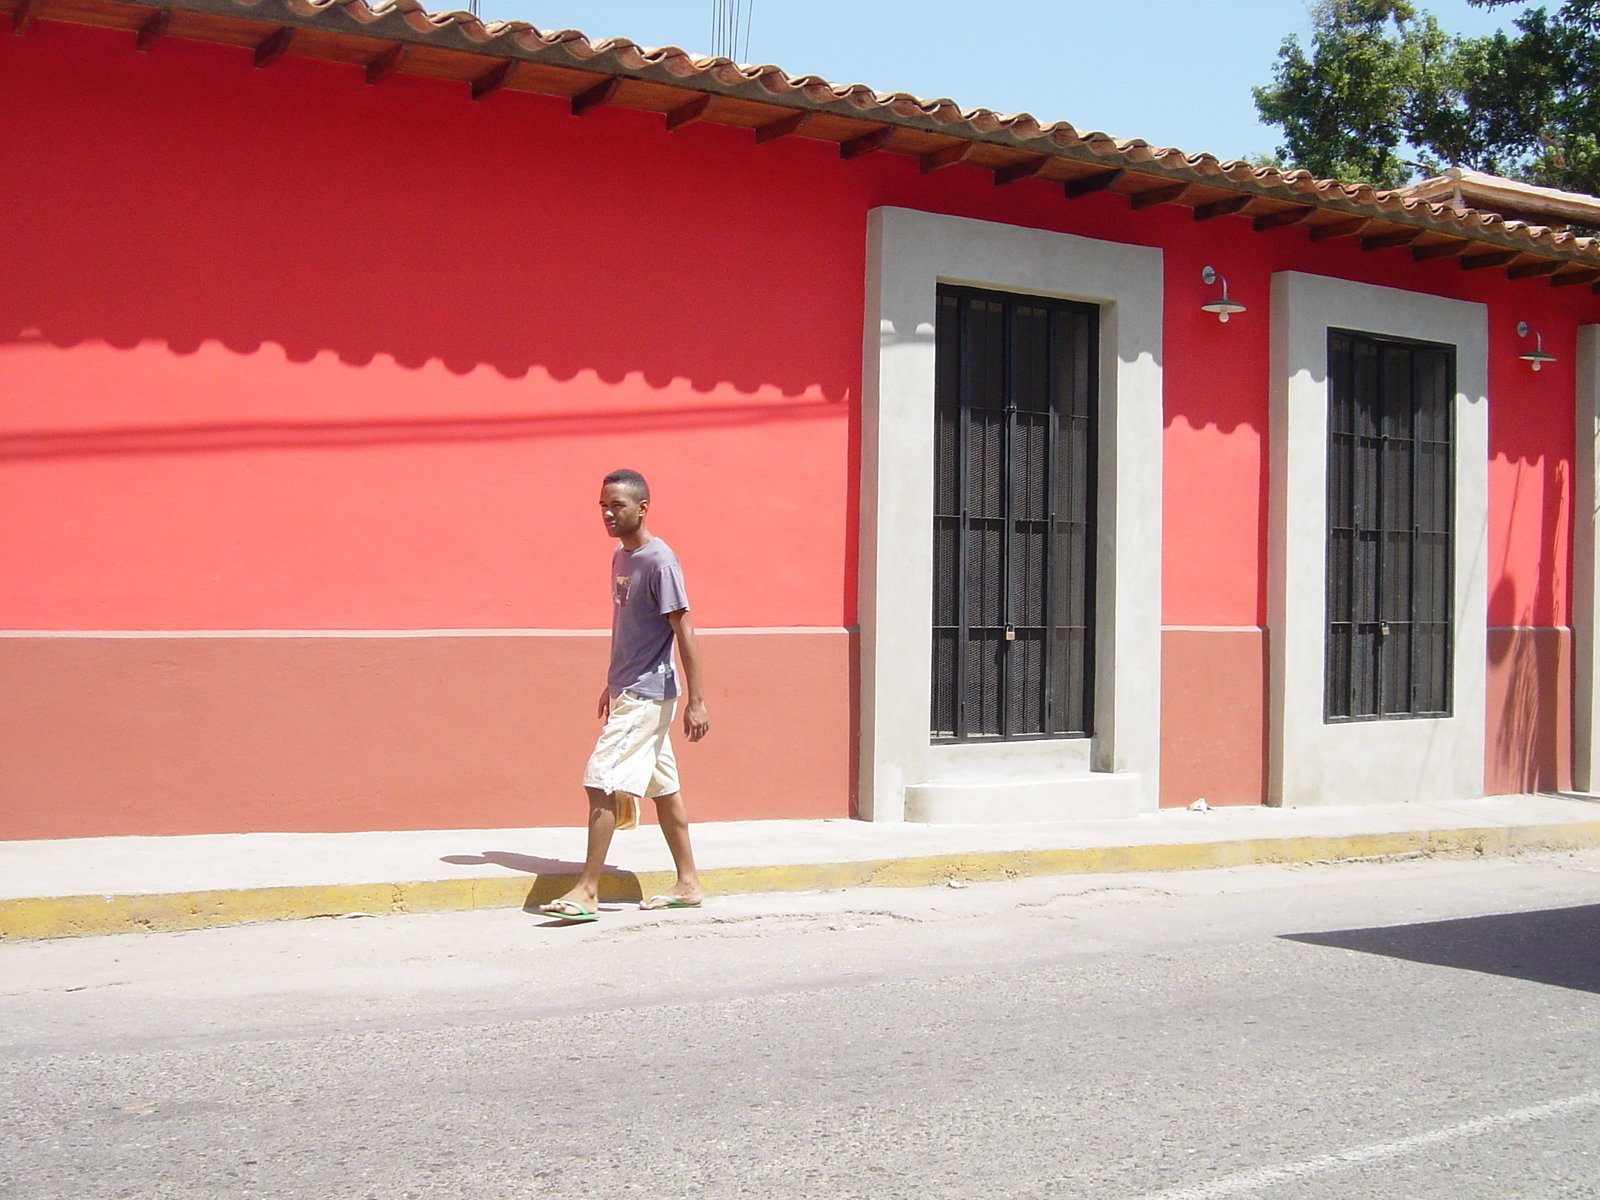 a man is walking on the sidewalk beside an old red and pink building